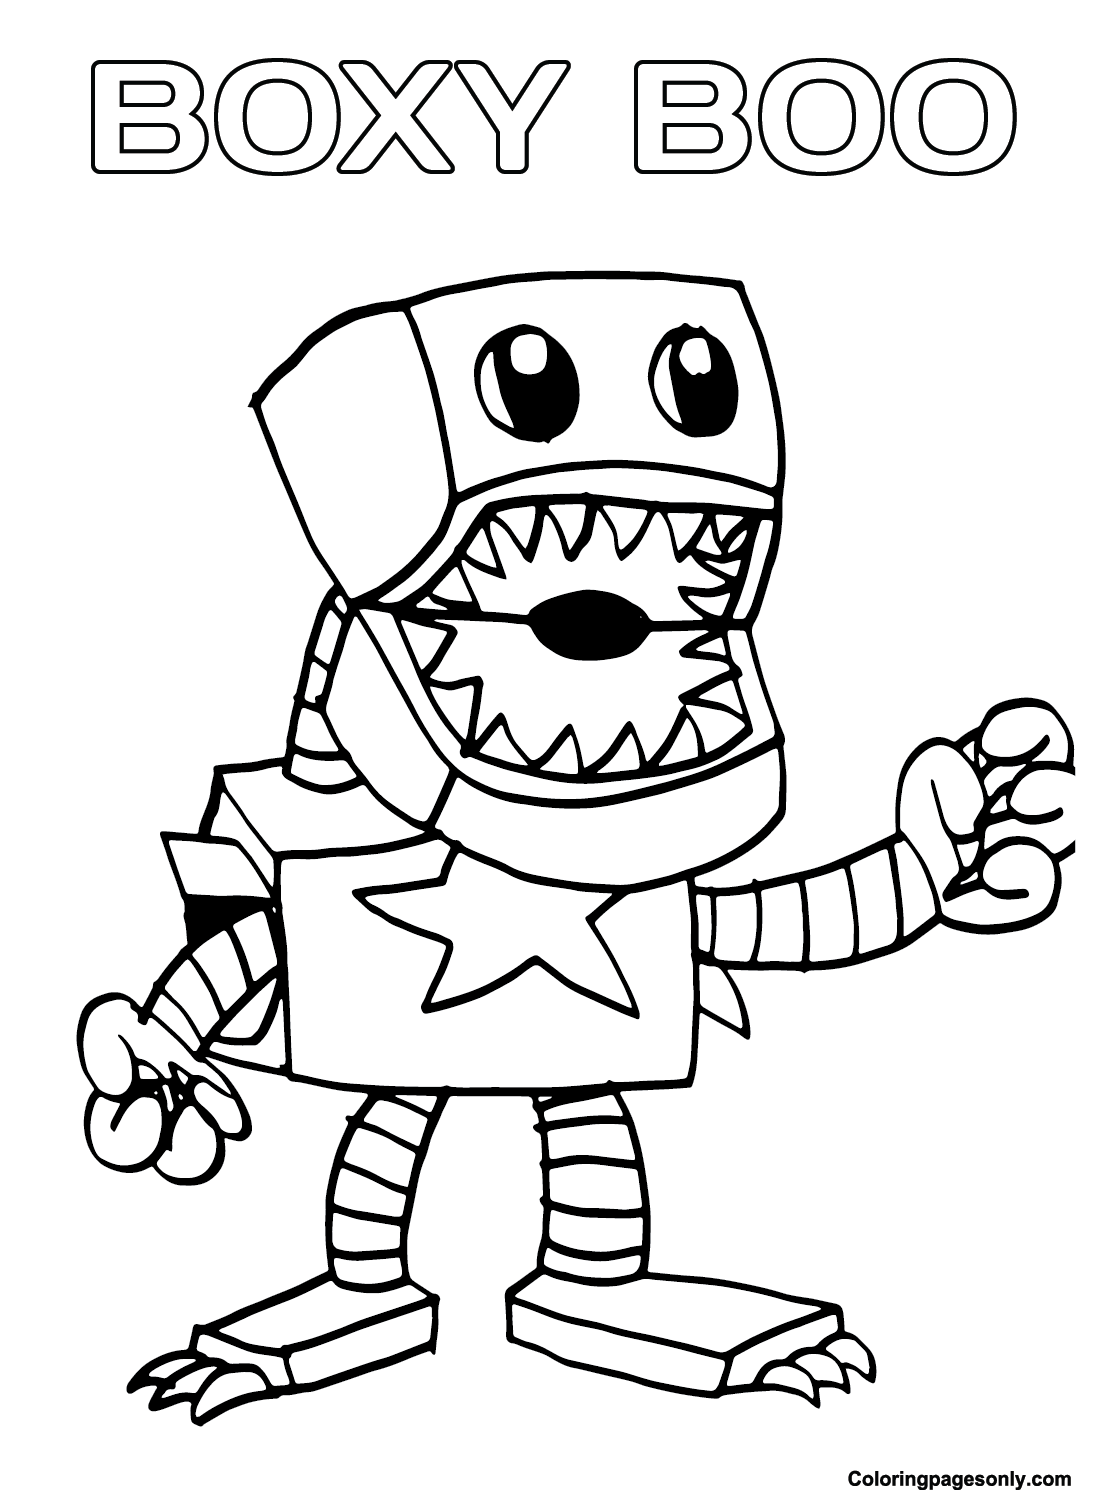 Boxy Boo Images Coloring Page